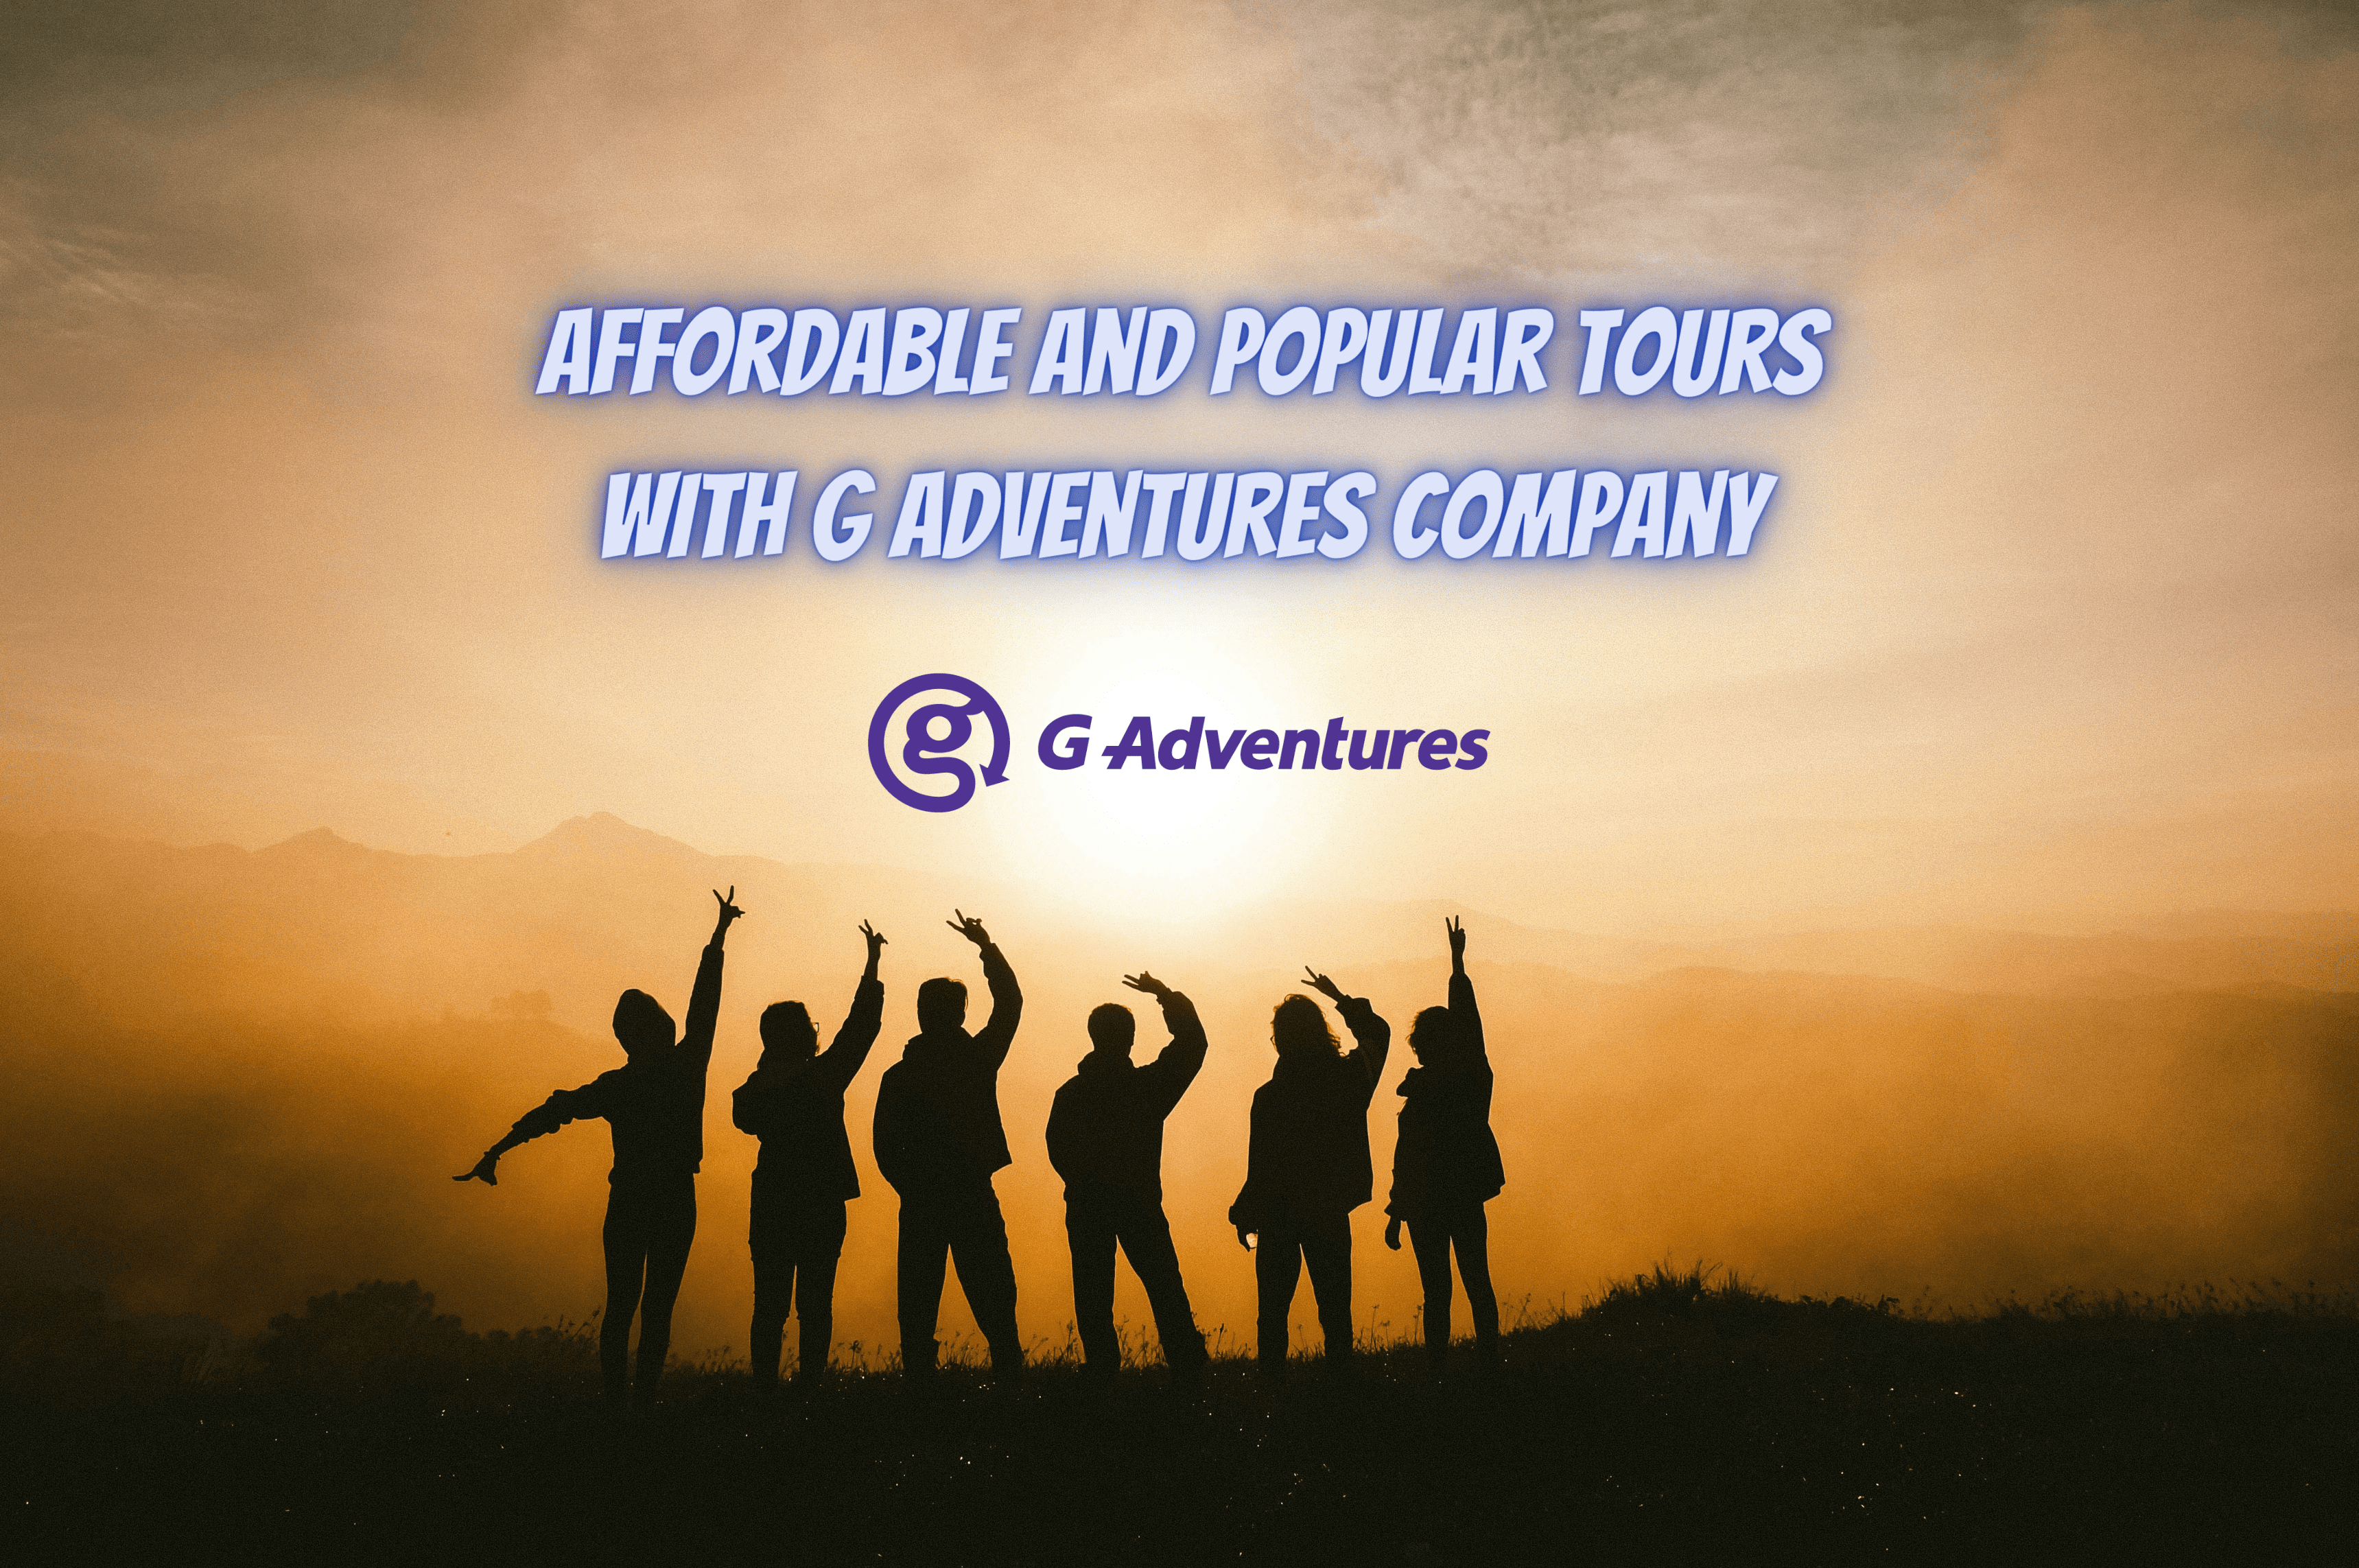 Affordable and Popular Tours by G Adventures company